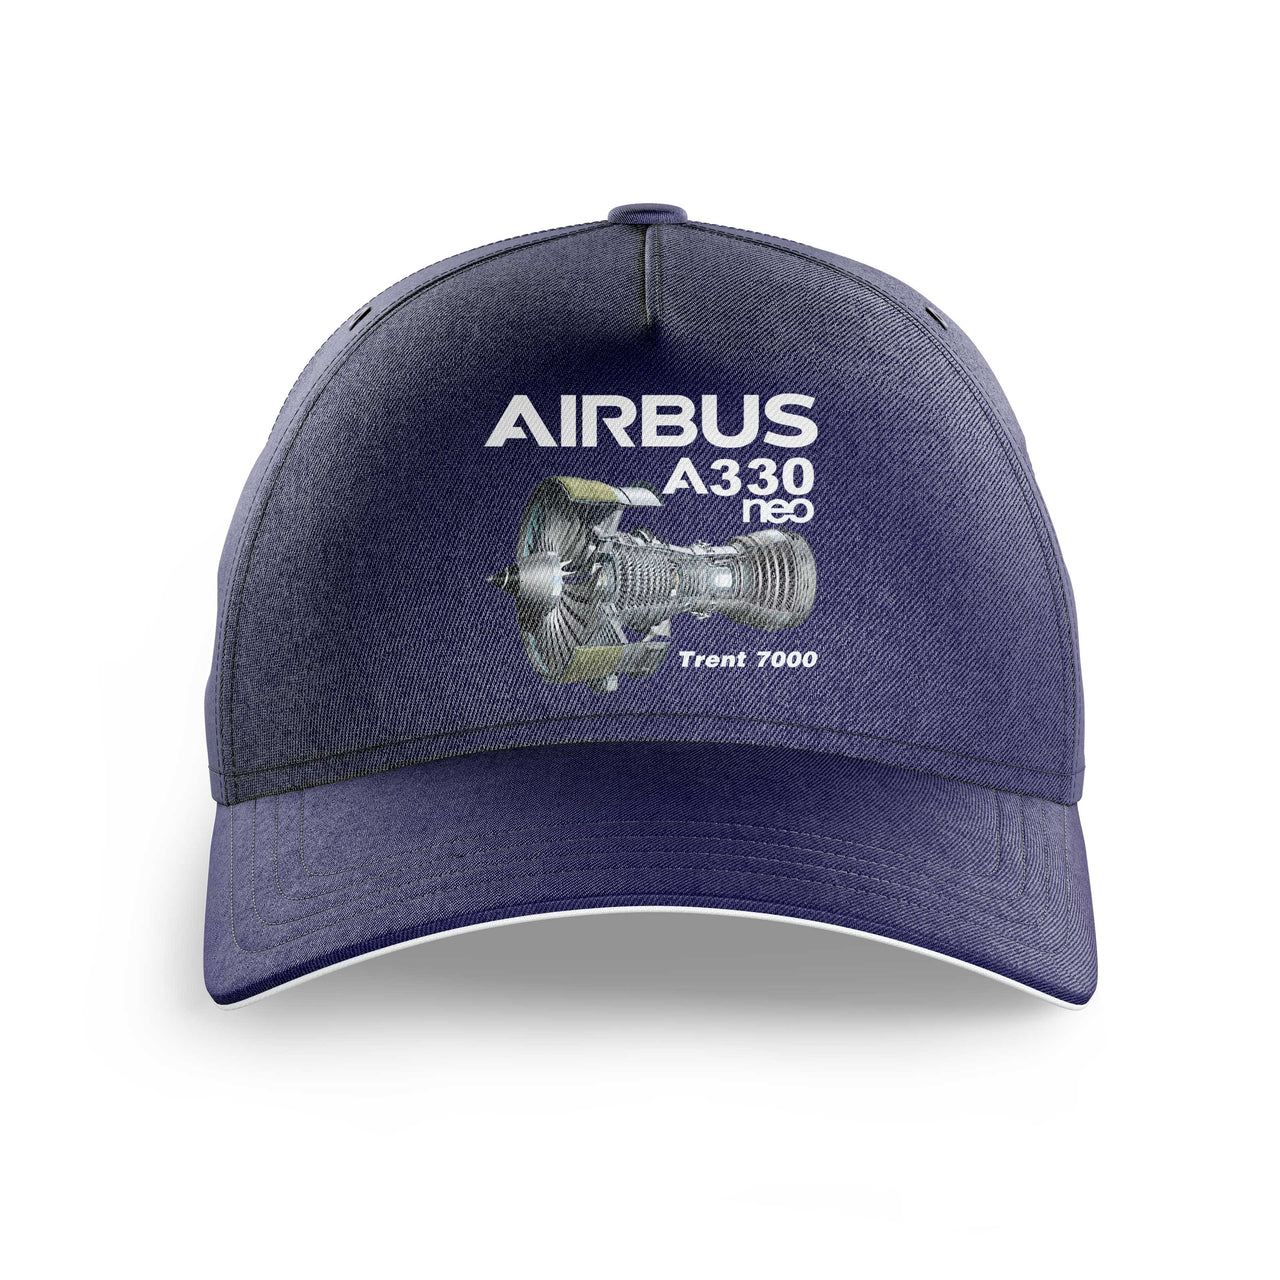 Airbus A330neo & Trent 7000 Engine Printed Hats